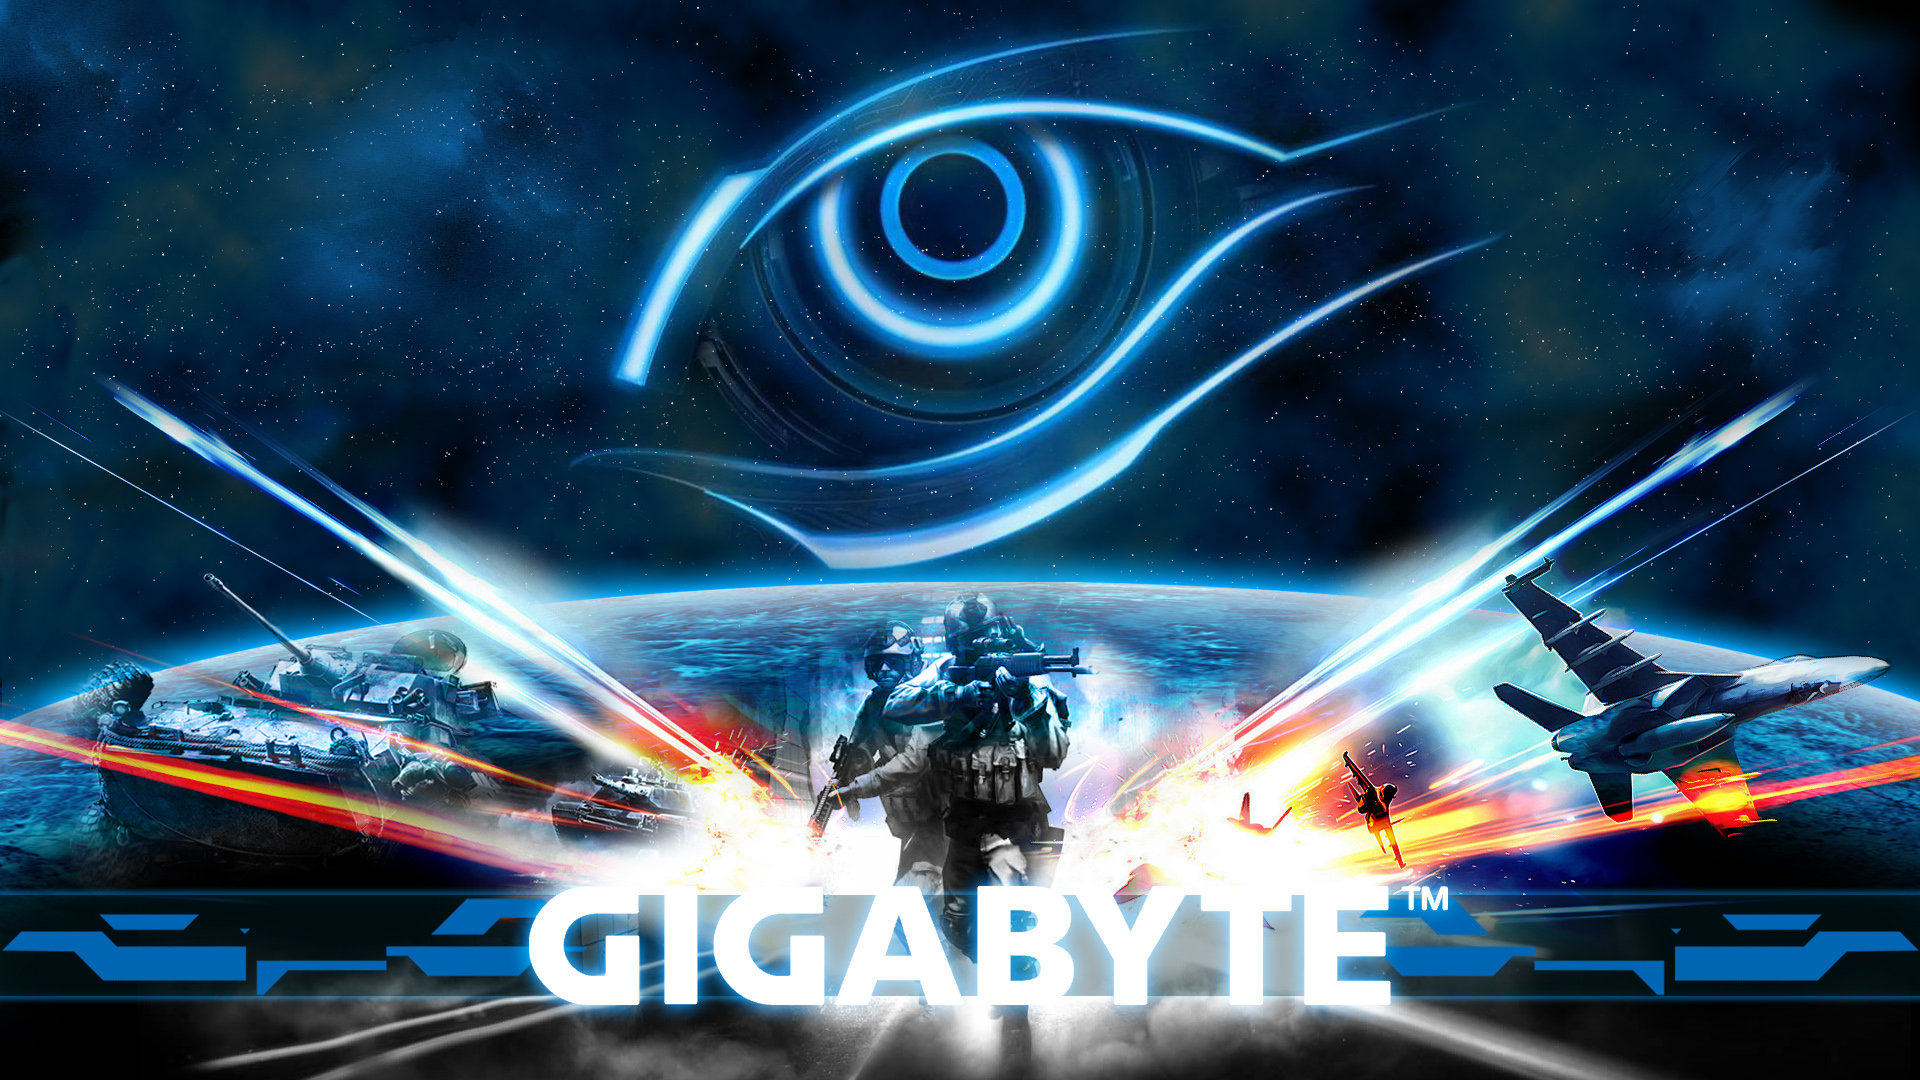 Battlefield And Gigabyte The Perfect Match By Psygnos1s On